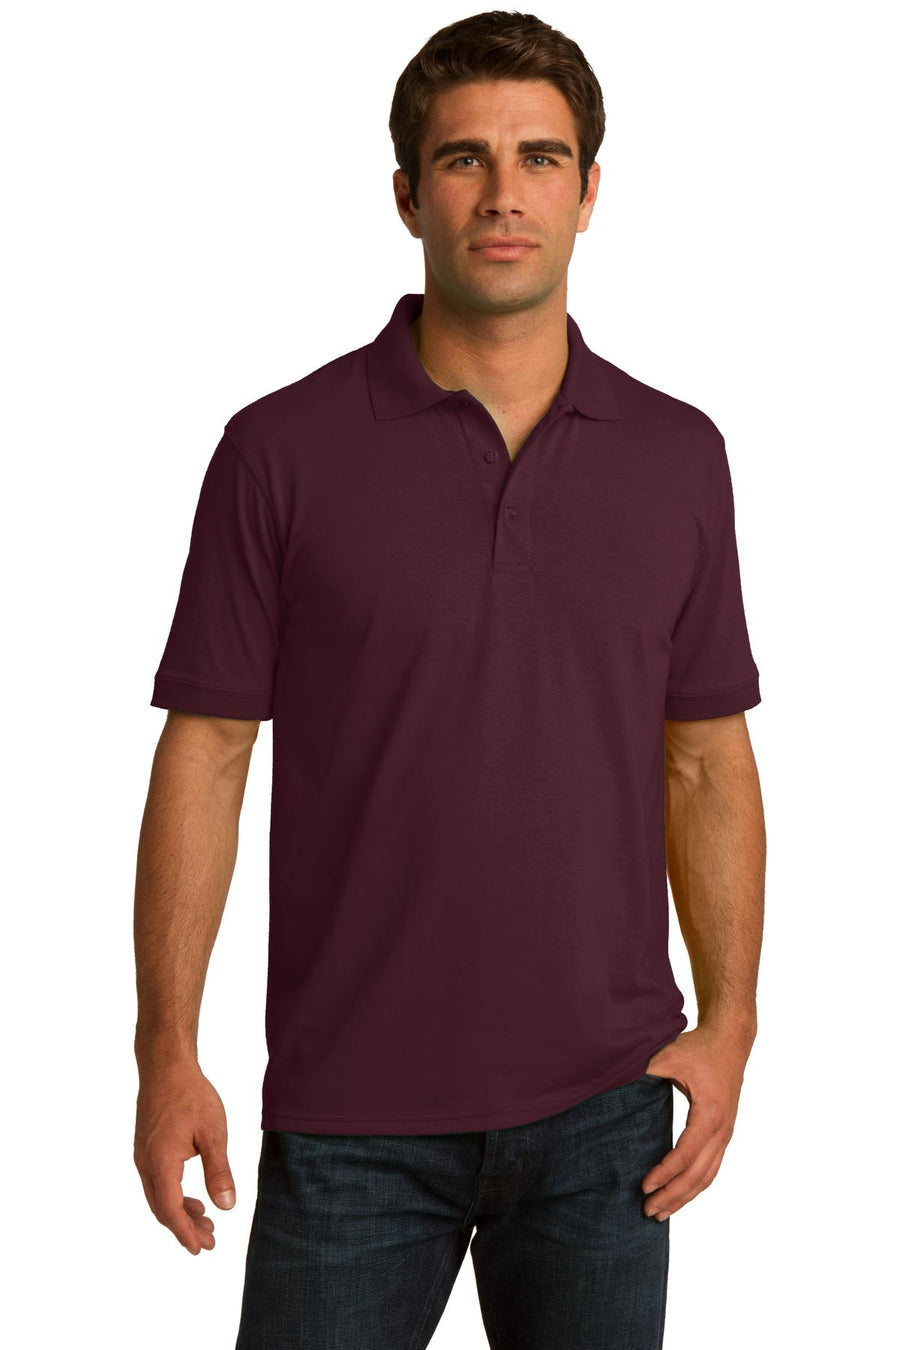 KP55T-Athletic Maroon-front_model